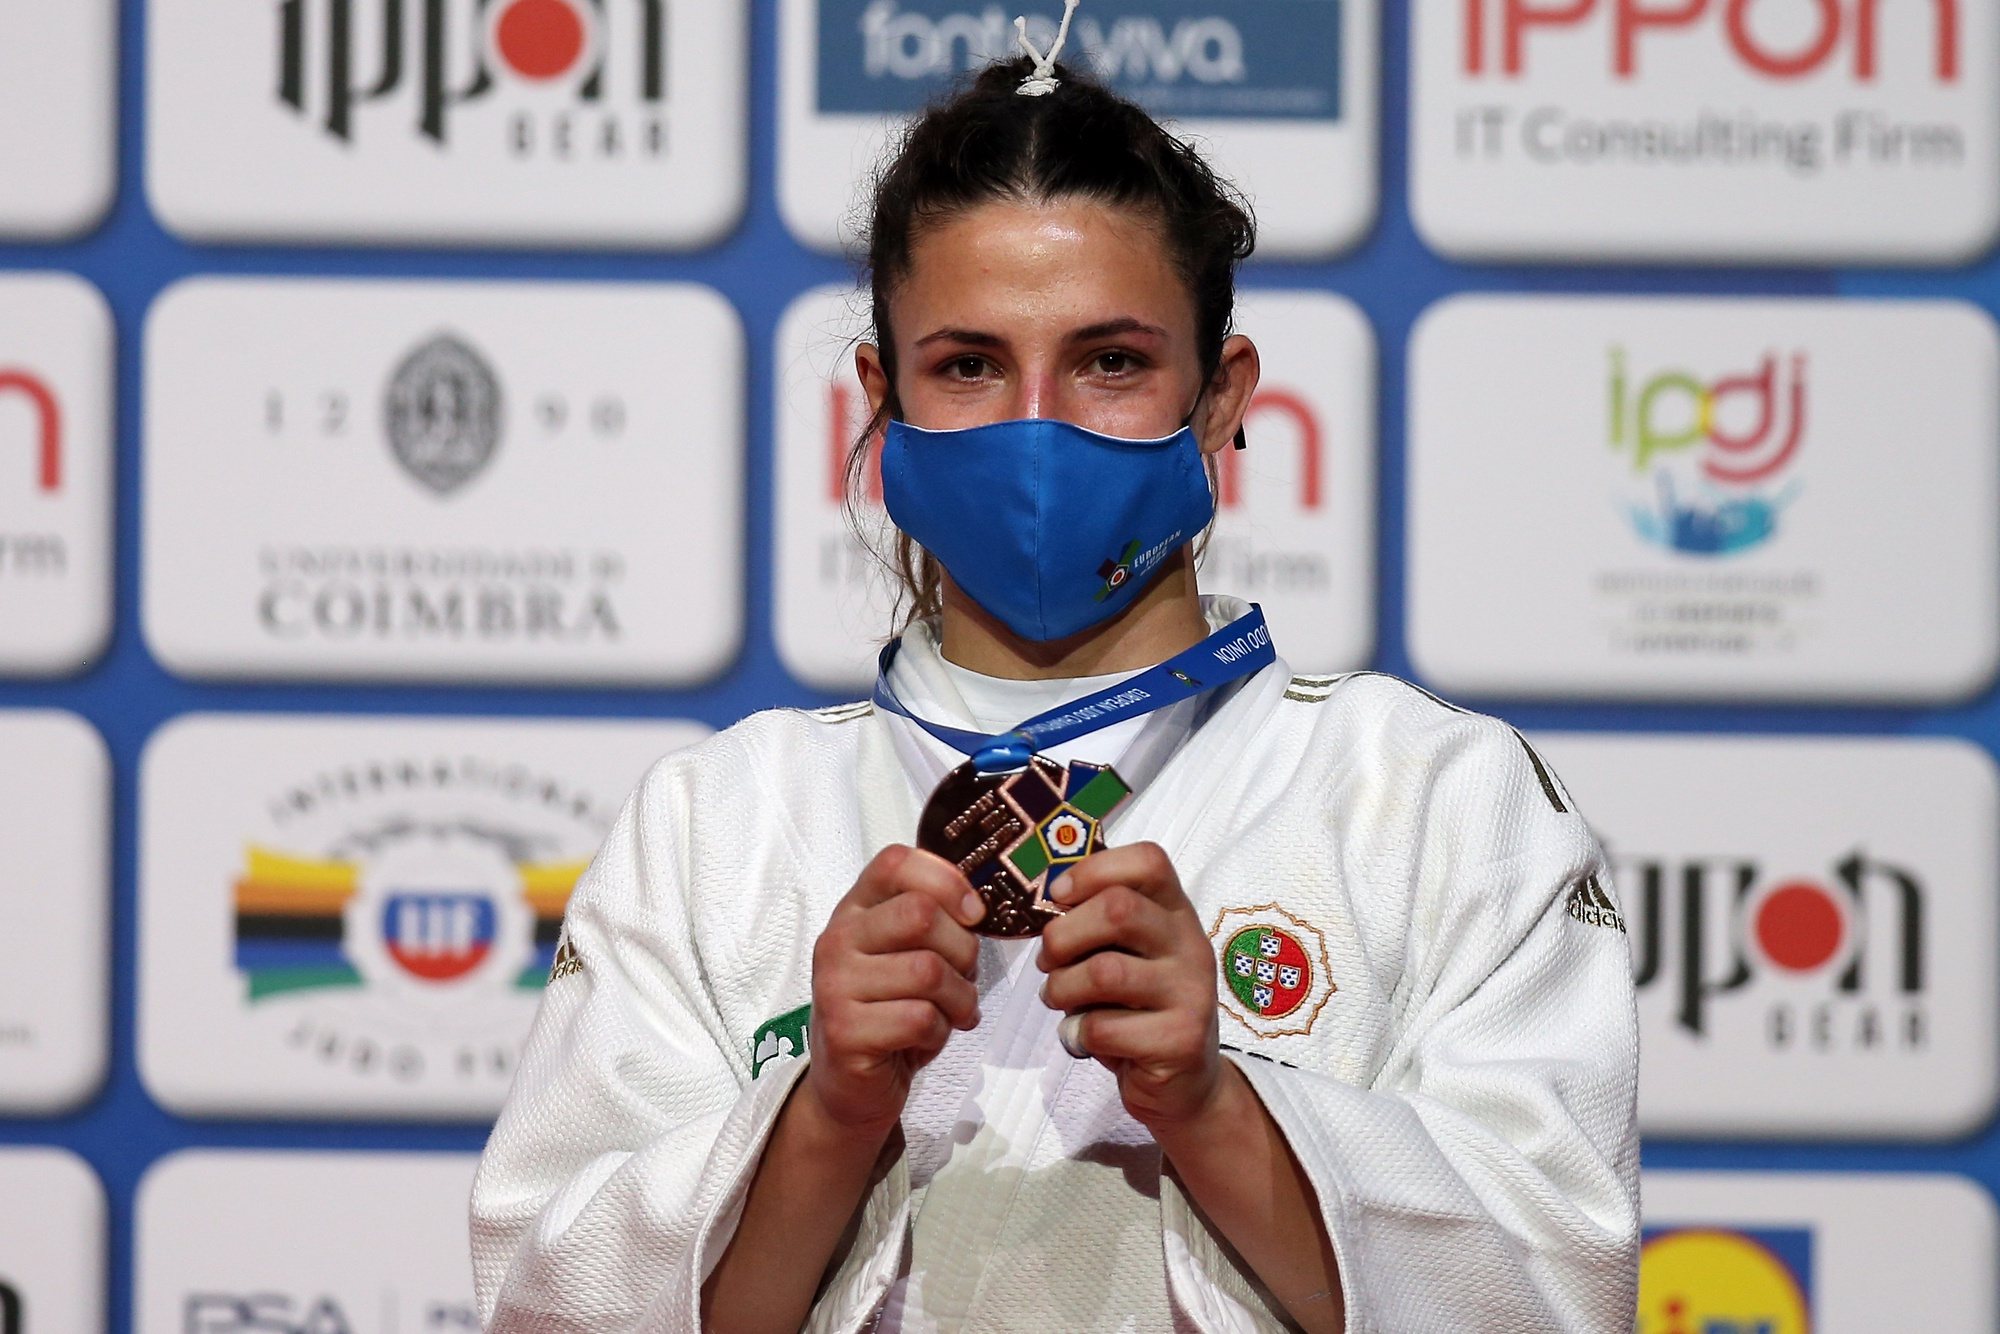 Barbara Timo of Portugal celebrates in the medals cerimony after win the bronze medal in woman&#039;s -70kg category at the European Judo Championships in Lisbon, Portugal, 17 April 2021. NUNO VEIGA/LUSA